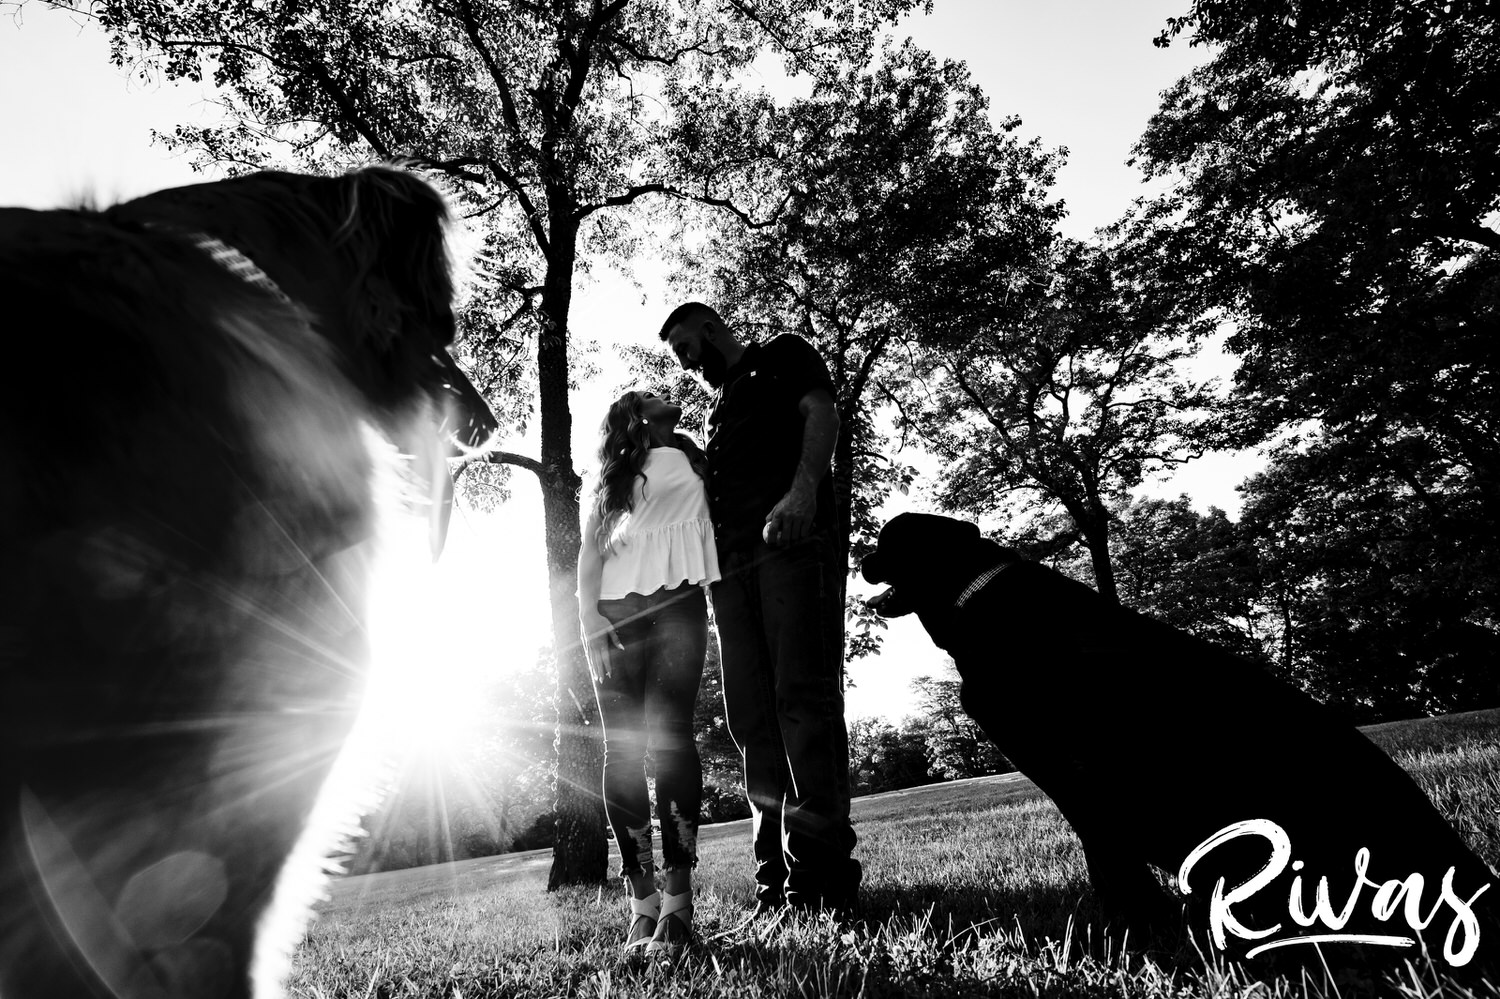 A colorful, candid picture of a golden retriever and black lab chasing a tennis ball as their owners, an engaged couple, share a kiss in the background of the image. 